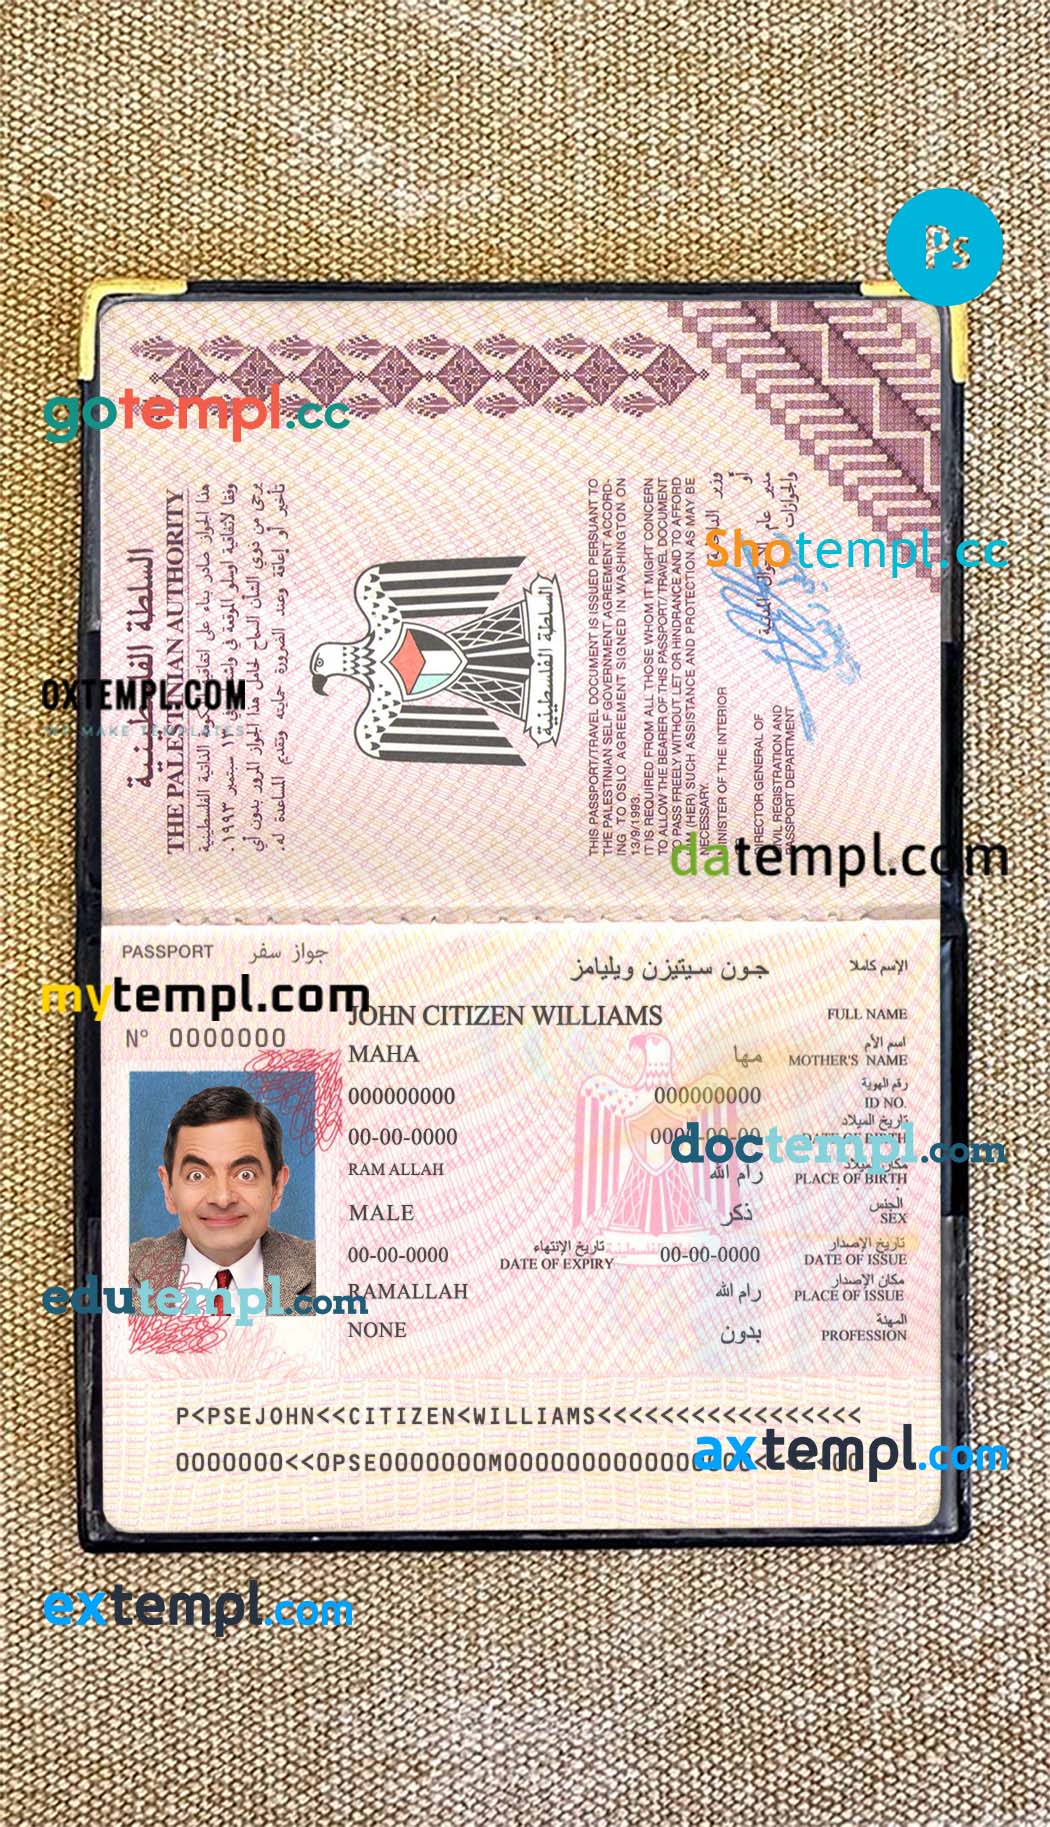 Malta passport editable PSD files, scan and photo-realistic look (2019-present),2 in 1